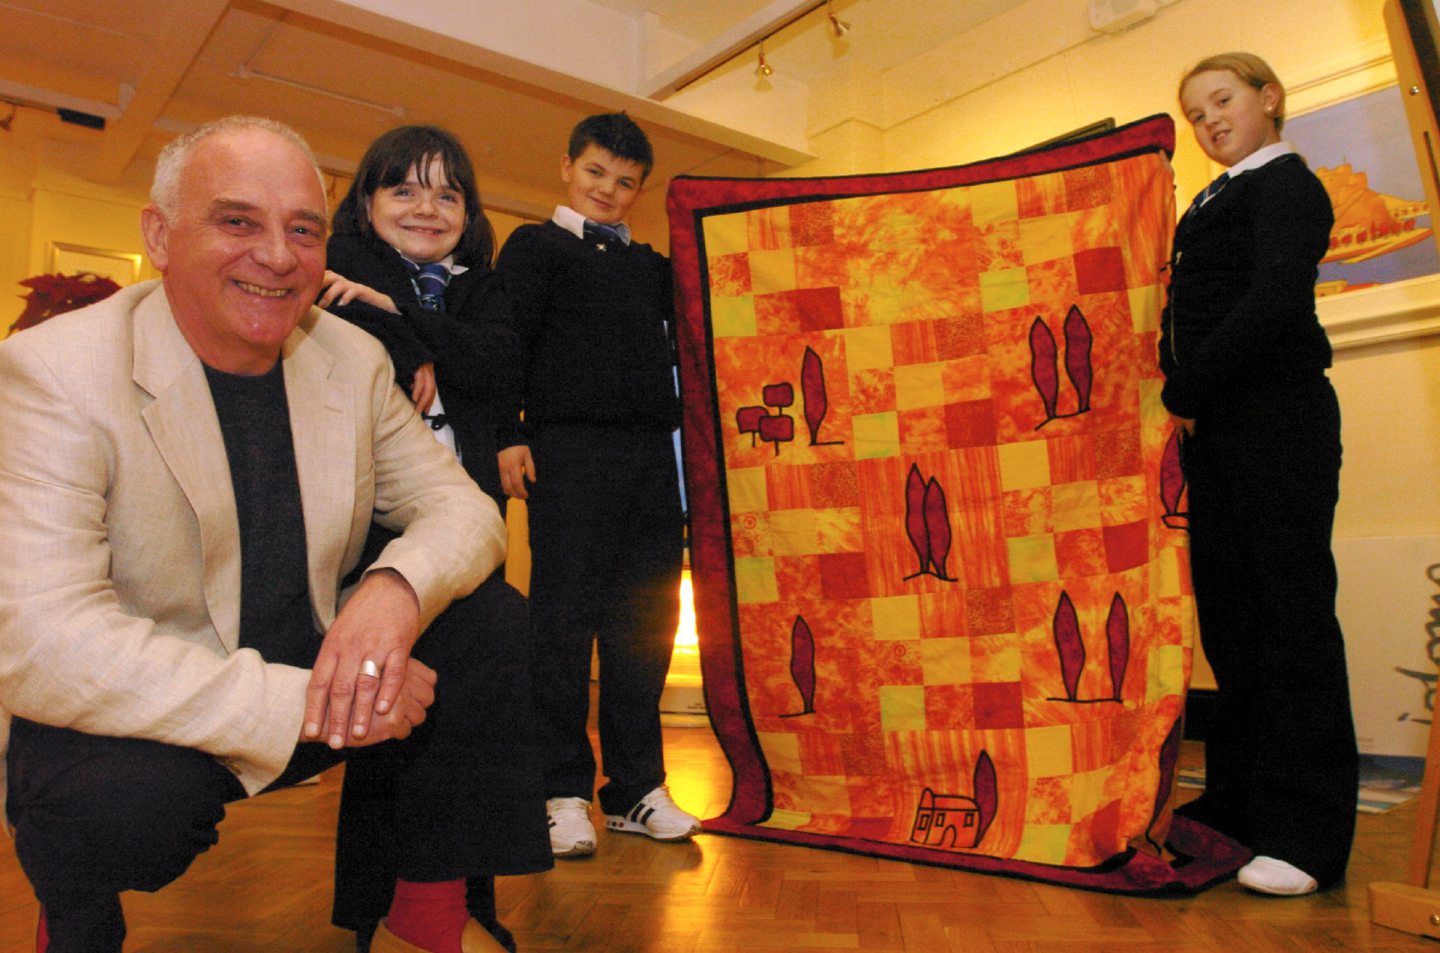 Iain Carby with kids from Walker Road School at his art Gallery and the quilt pupils made.